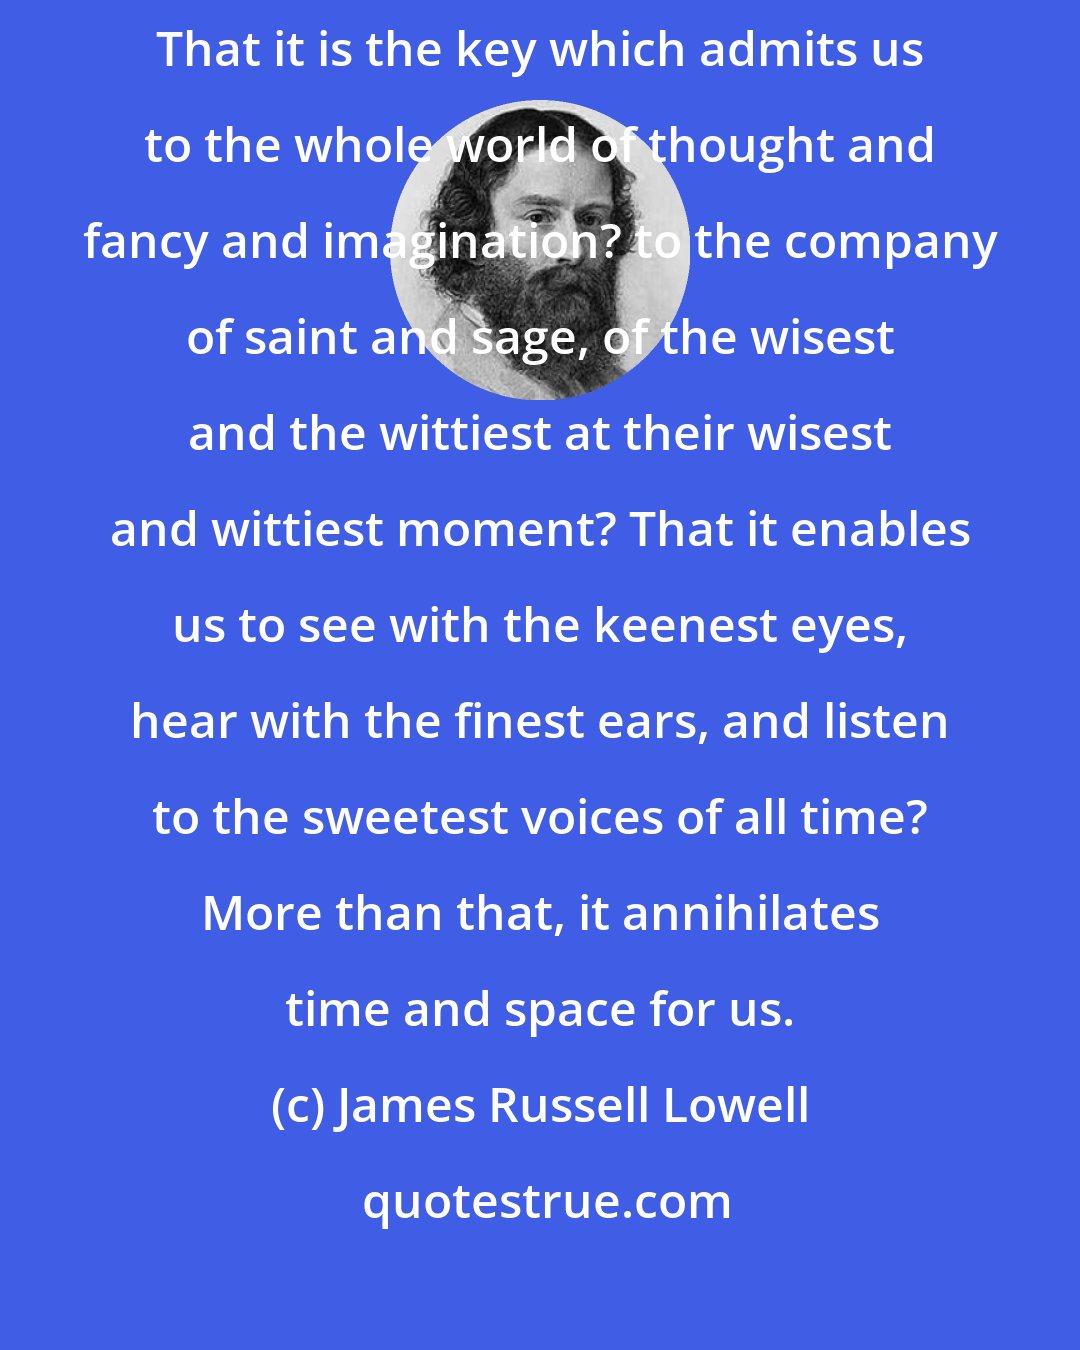 James Russell Lowell: Have you ever rightly considered what the mere ability to read means? That it is the key which admits us to the whole world of thought and fancy and imagination? to the company of saint and sage, of the wisest and the wittiest at their wisest and wittiest moment? That it enables us to see with the keenest eyes, hear with the finest ears, and listen to the sweetest voices of all time? More than that, it annihilates time and space for us.